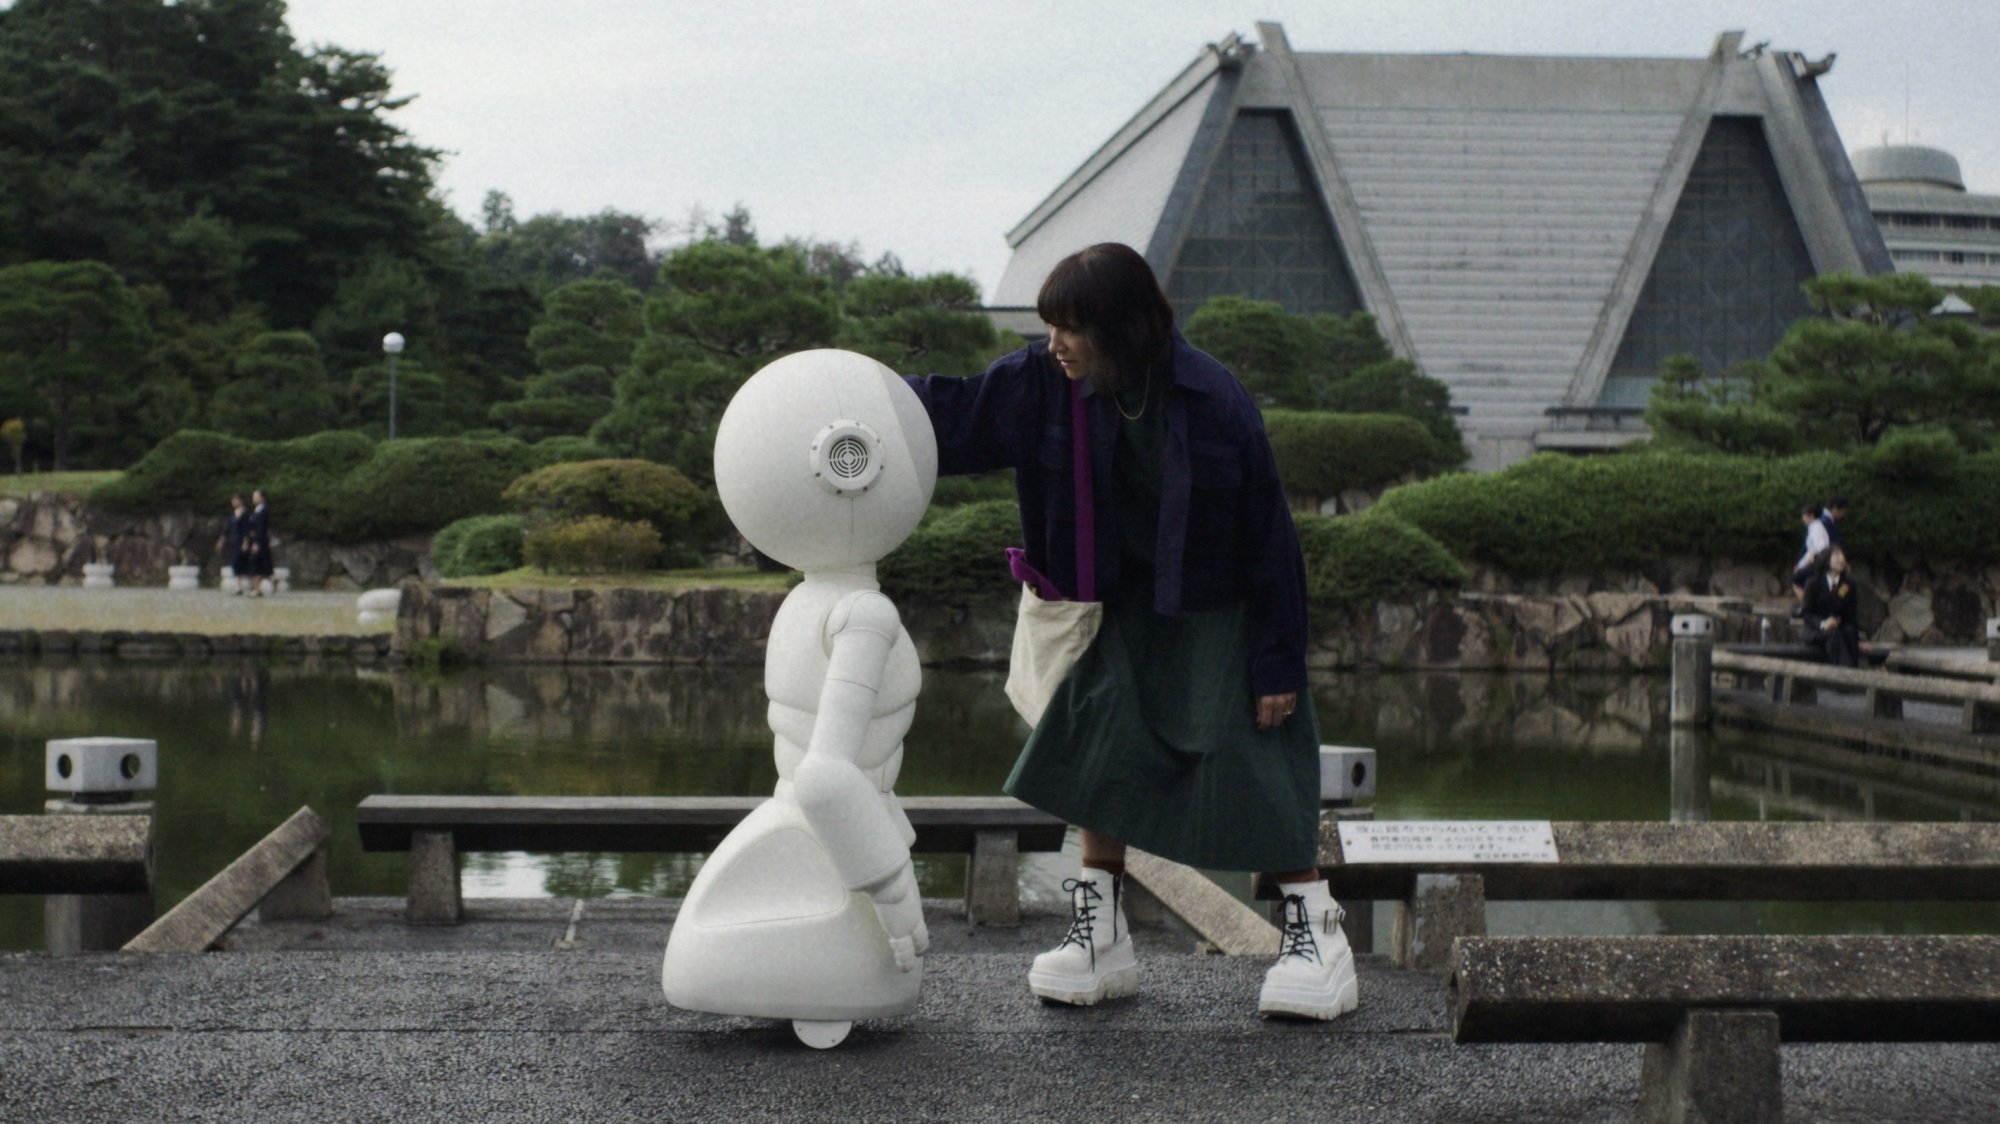 A woman pets a large white robot on the head.